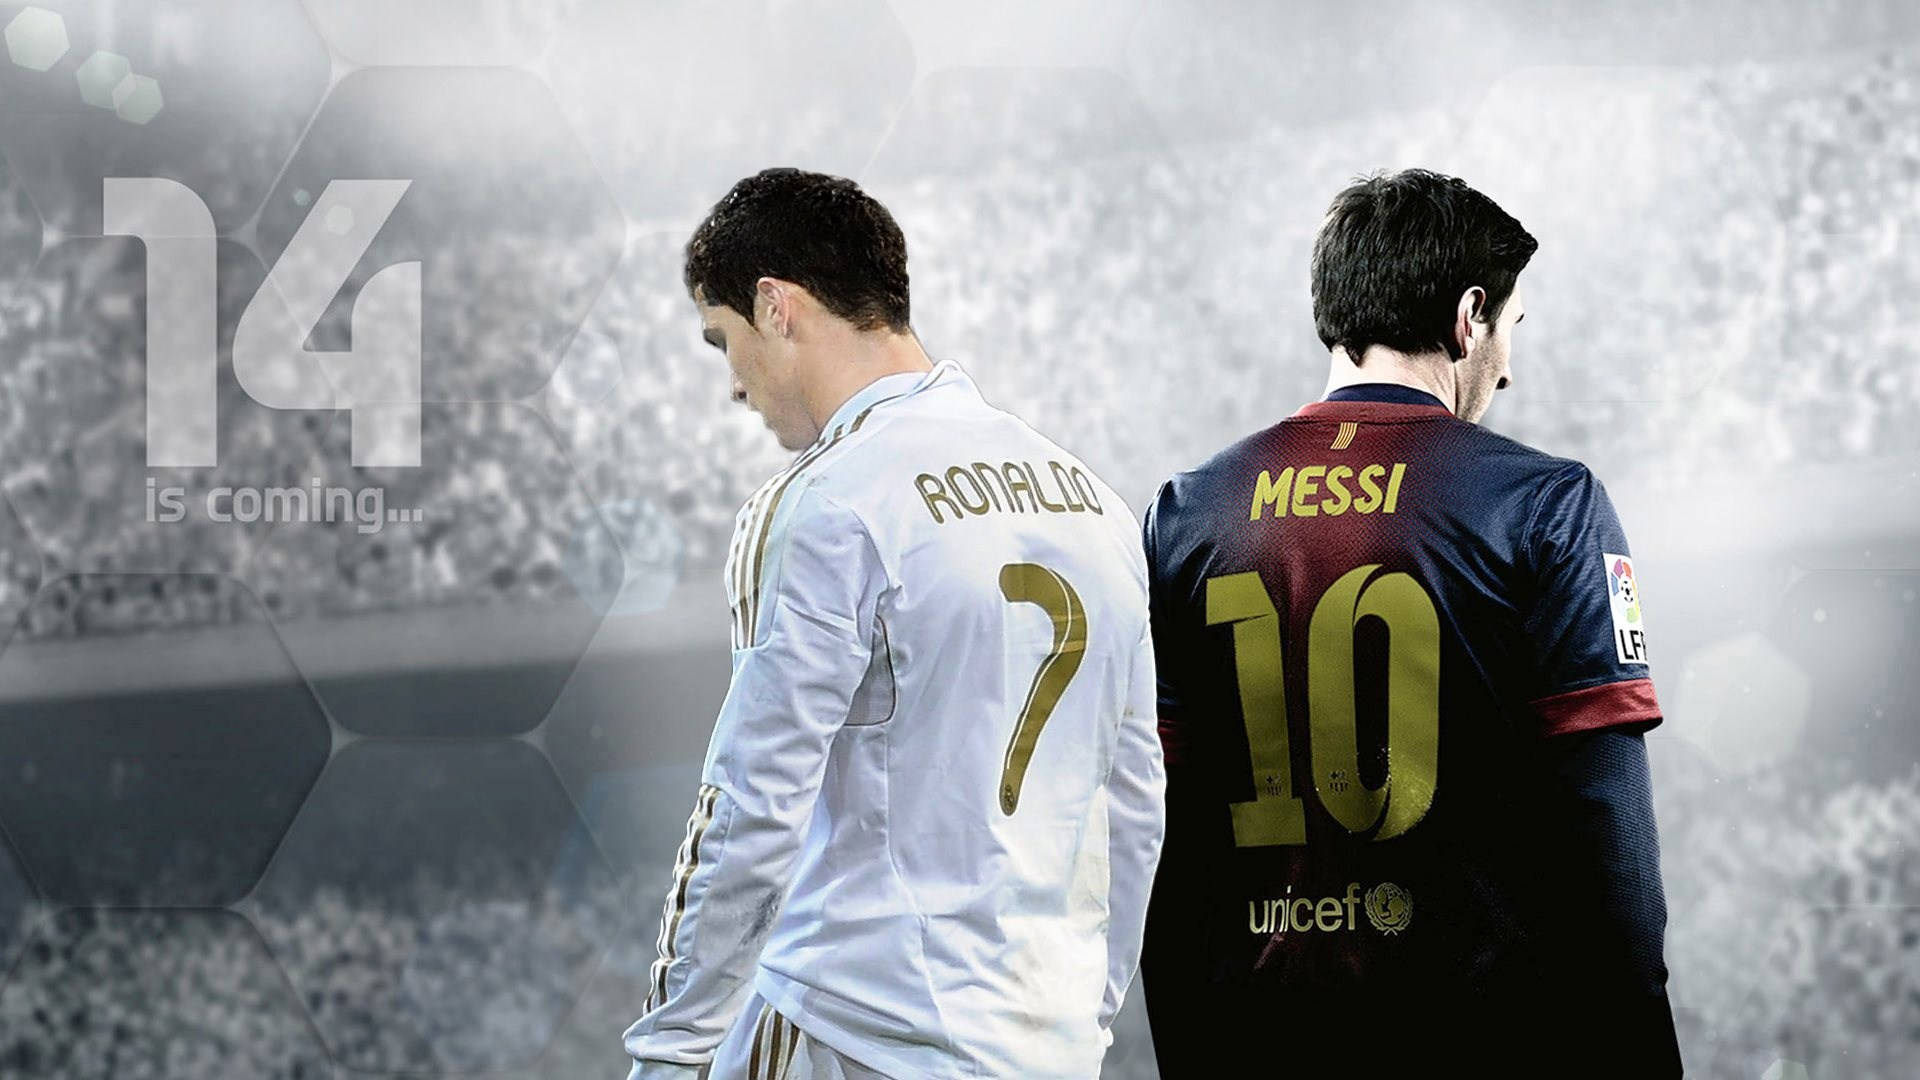 Cool Football Players Messi And Ronaldo Background